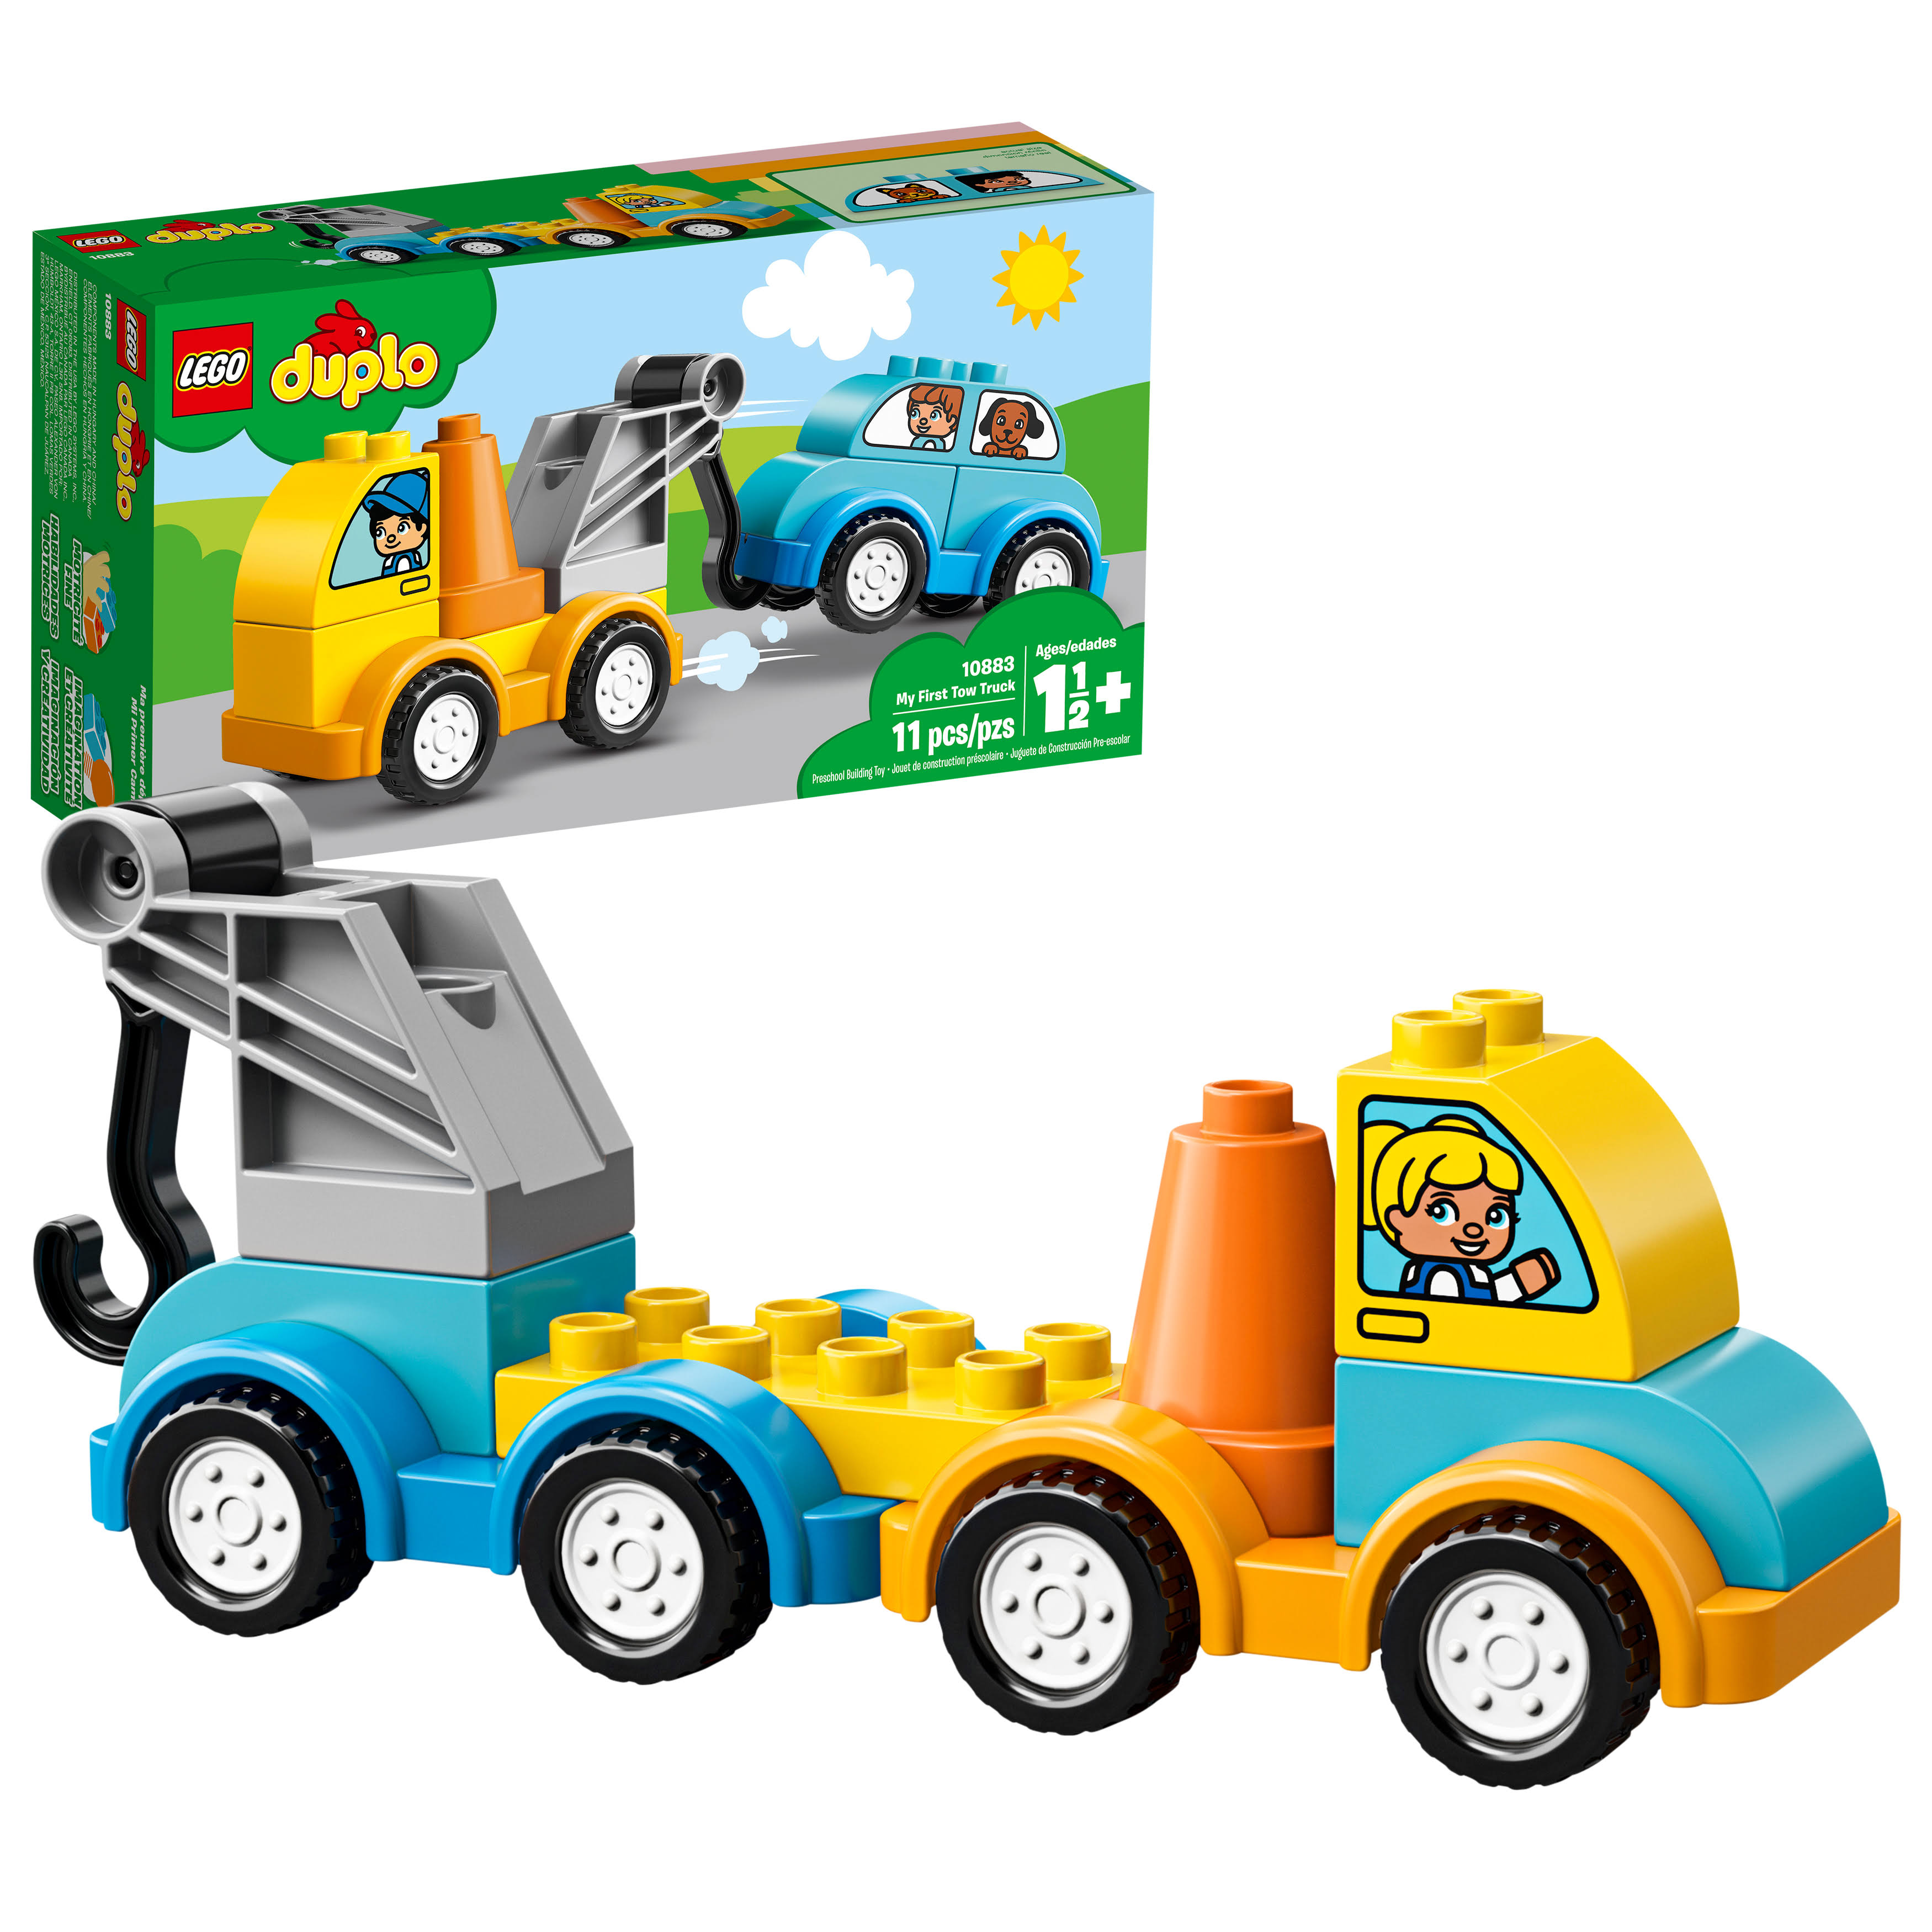 Lego 10883 Duplo My First Tow Truck